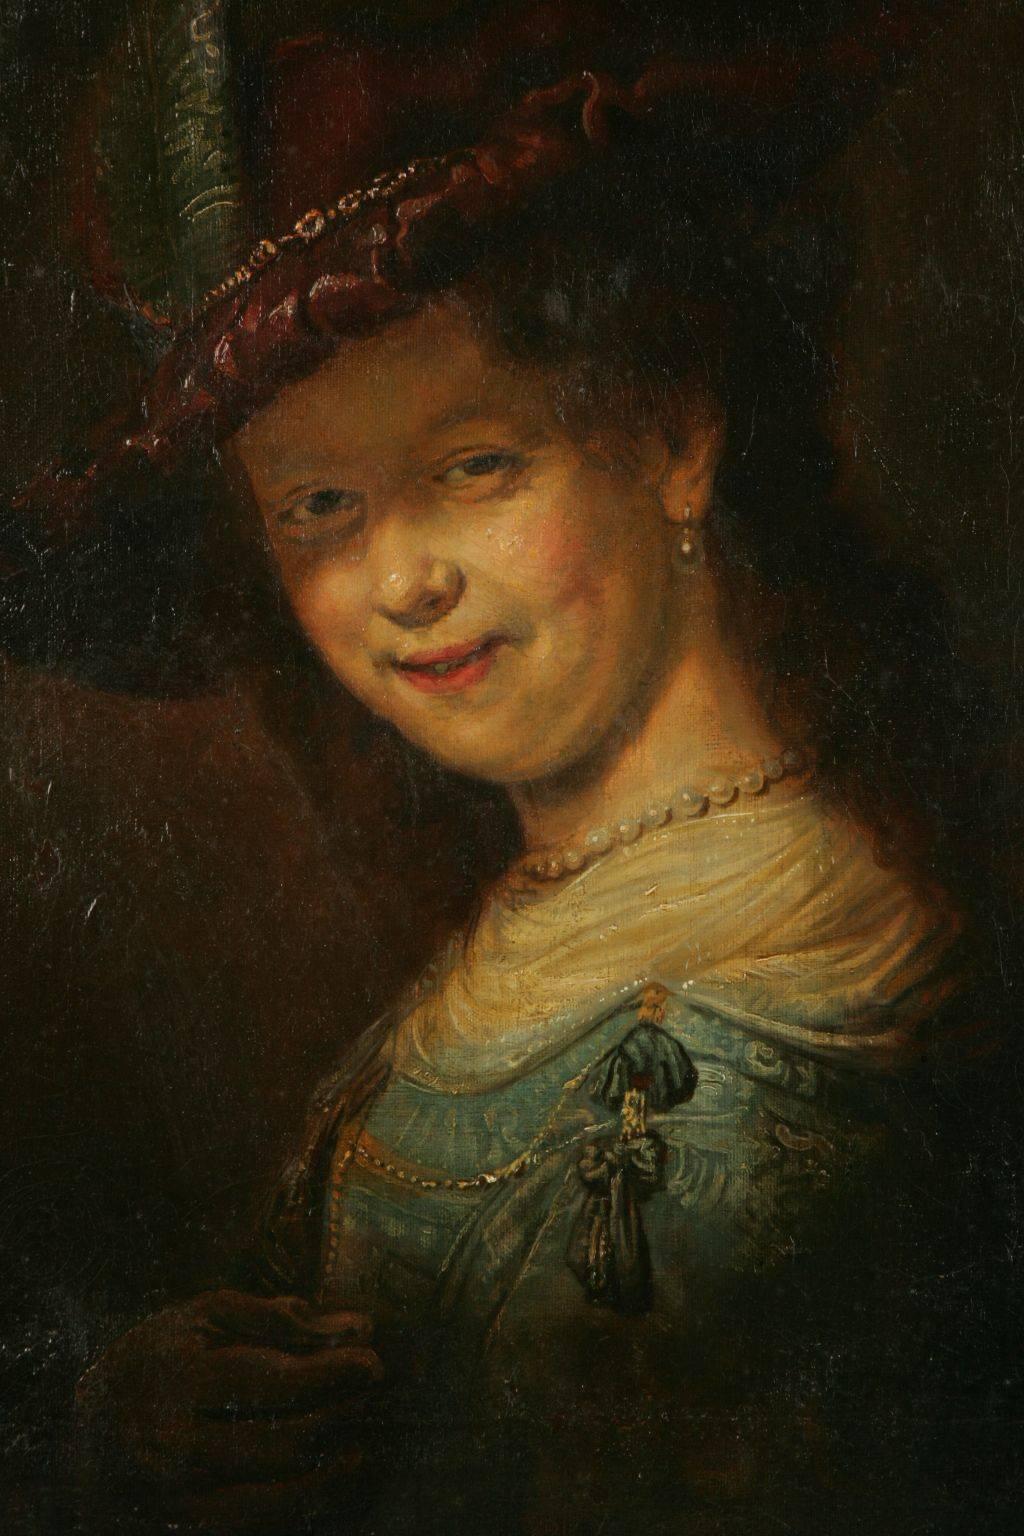 Saskia smiling with feather bar (circa 1633).
Oil on canvas. Exceptionally beautiful copy after Rembrandt, back titled - copy after No. 1556, the royal painting gallery to Dresden 1910. Portrait of Saskia van Uiljlenburgh as a young